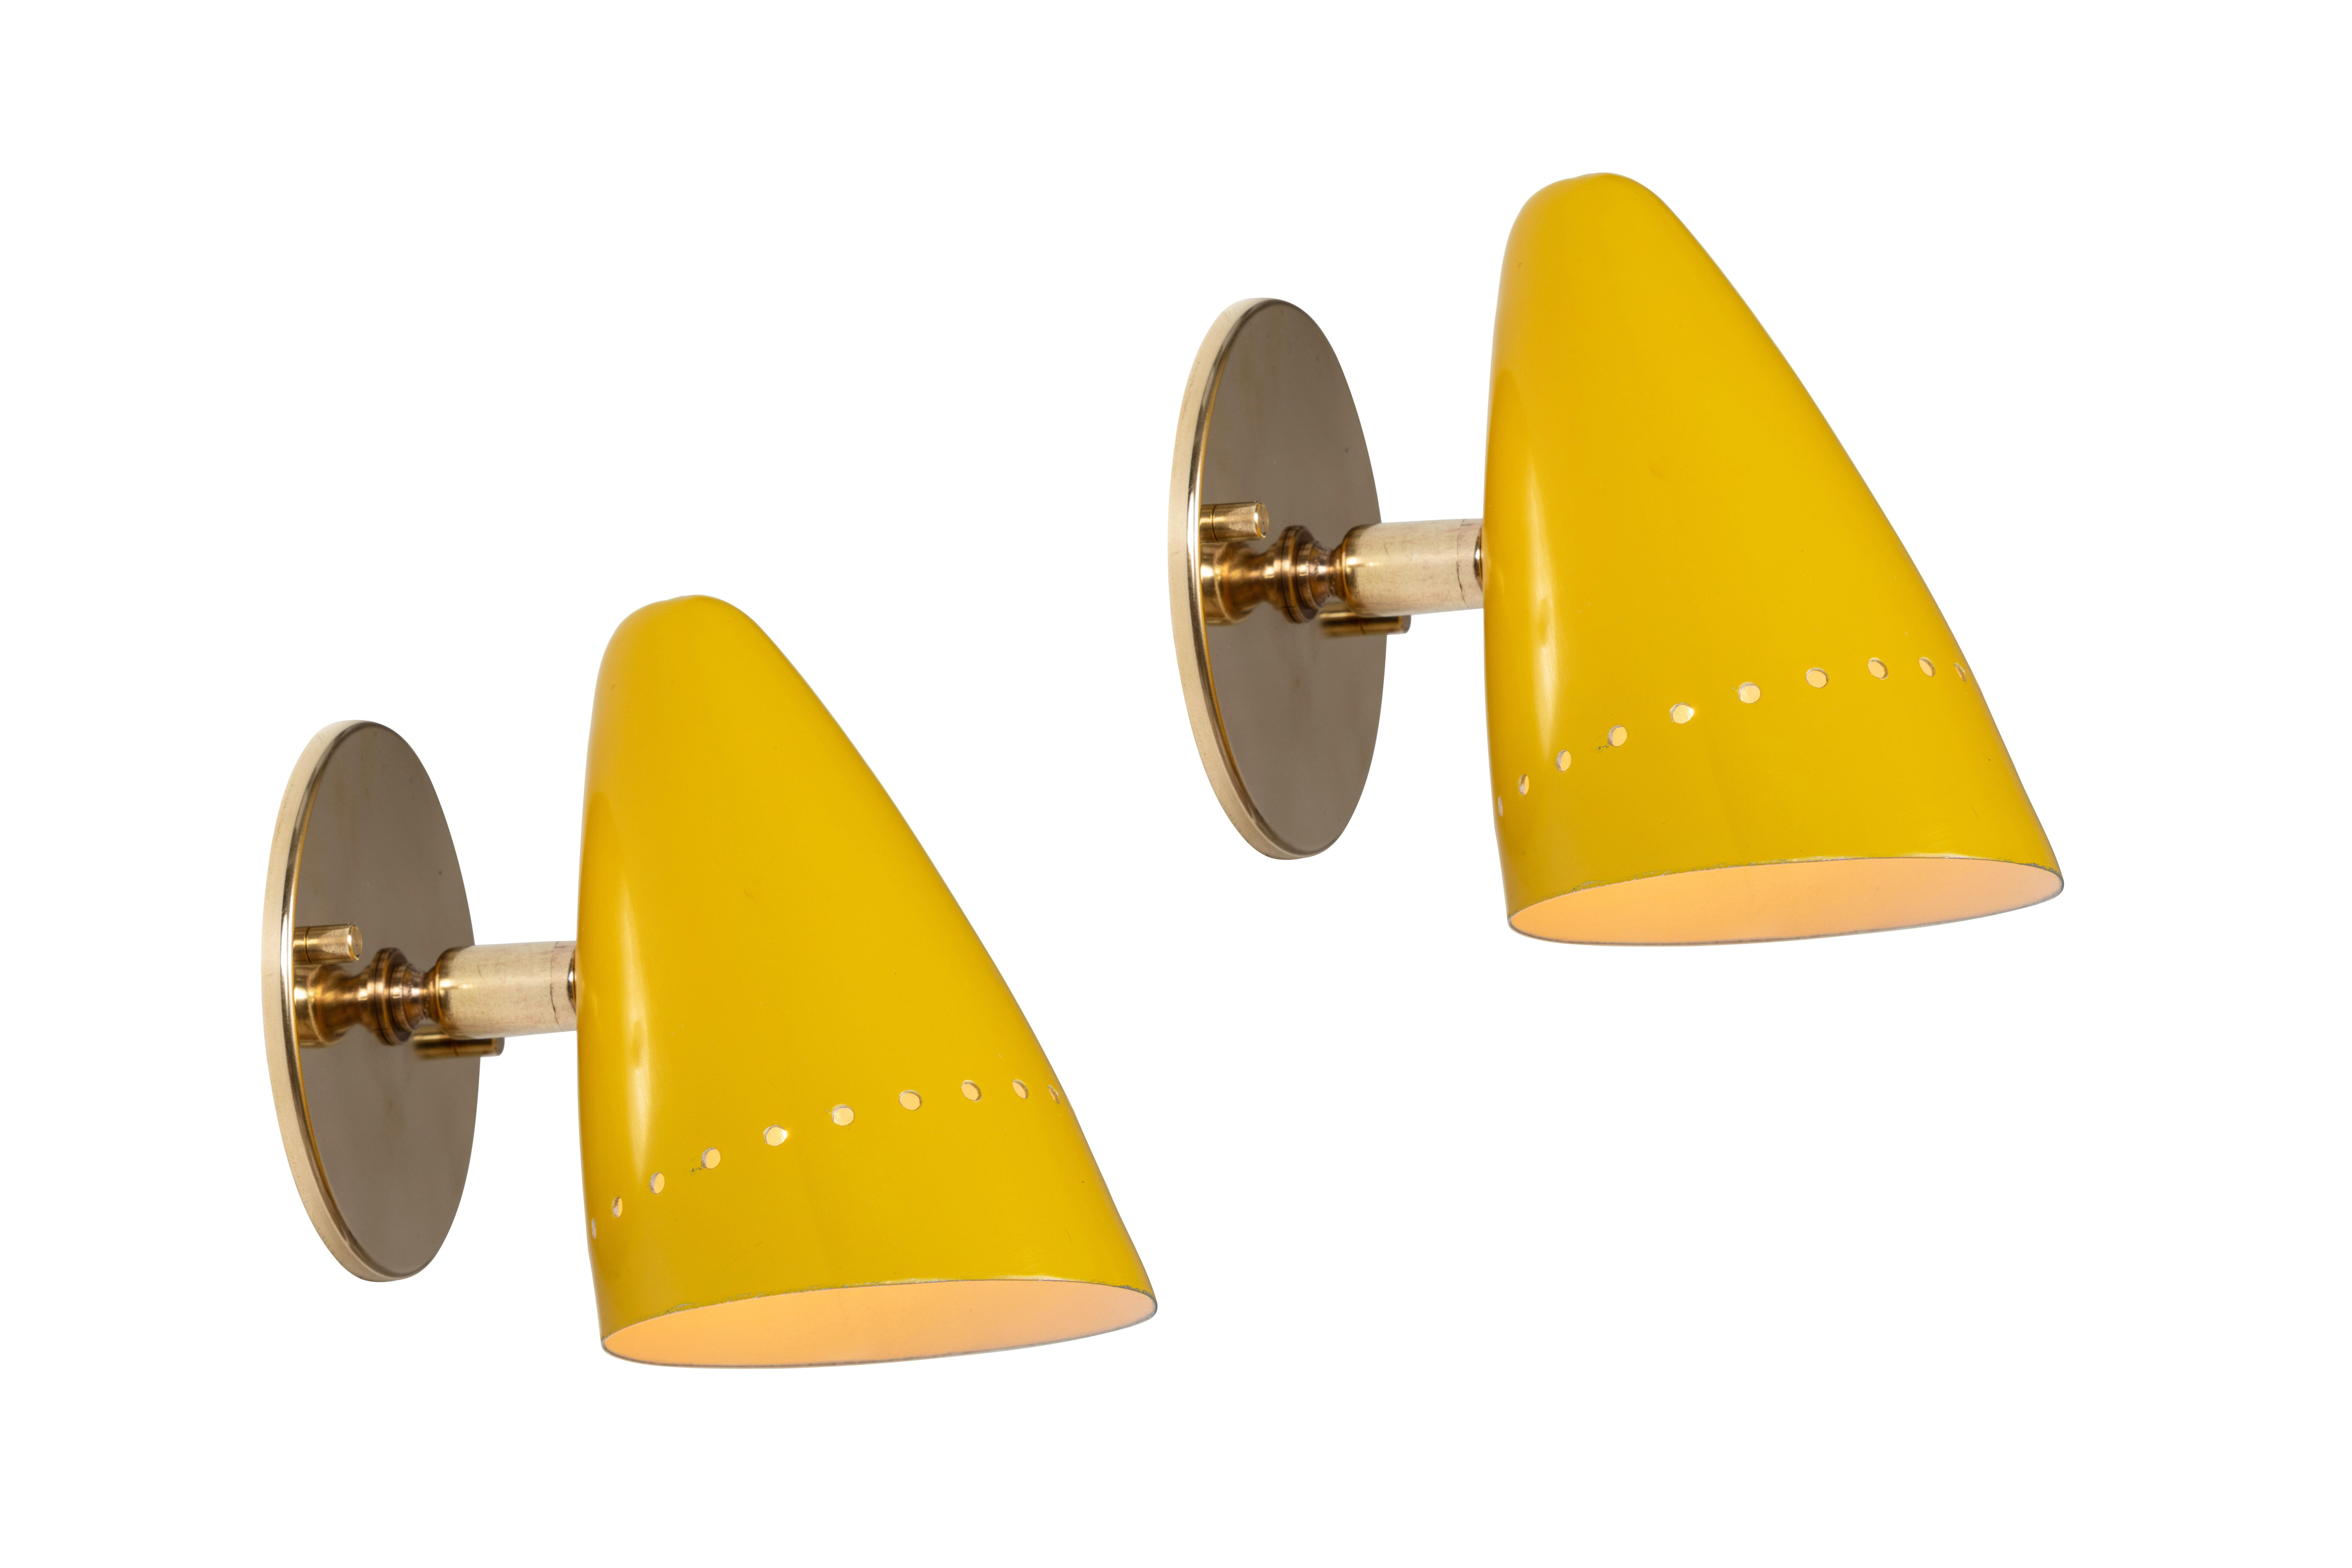 1950s Italian yellow perforated sconce attributed to Gino Sarfatti. Executed in brass and yellow painted aluminum. Sconce freely pivots up/down and rotates left/right on a ball joint. Custom brass backplate with brass hardware for hardwiring